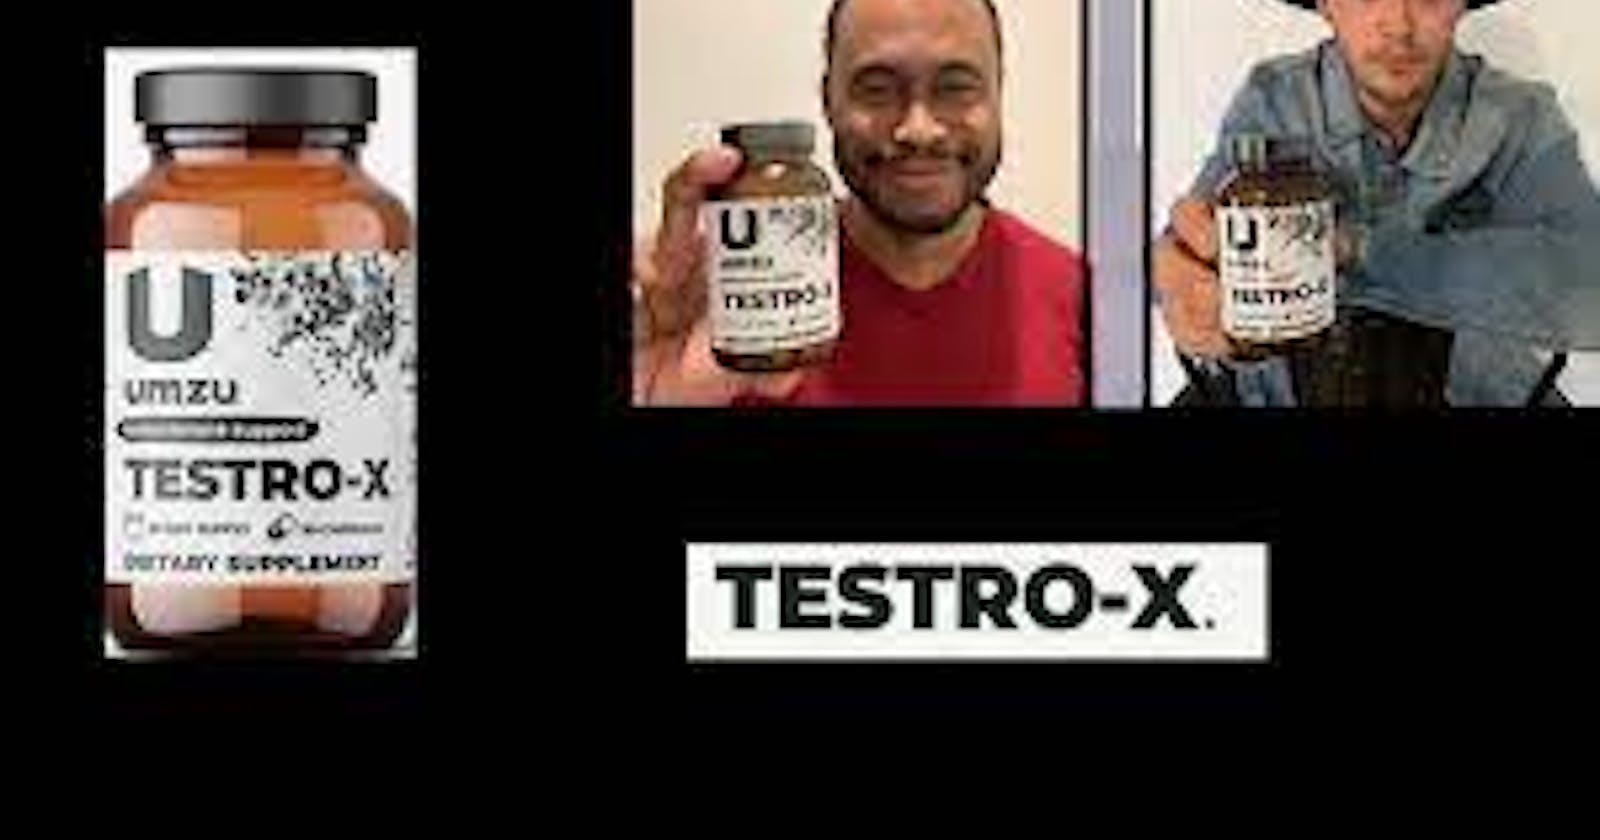 # UMZU Testro-X Review: Boosting Testosterone Safely and Effectively